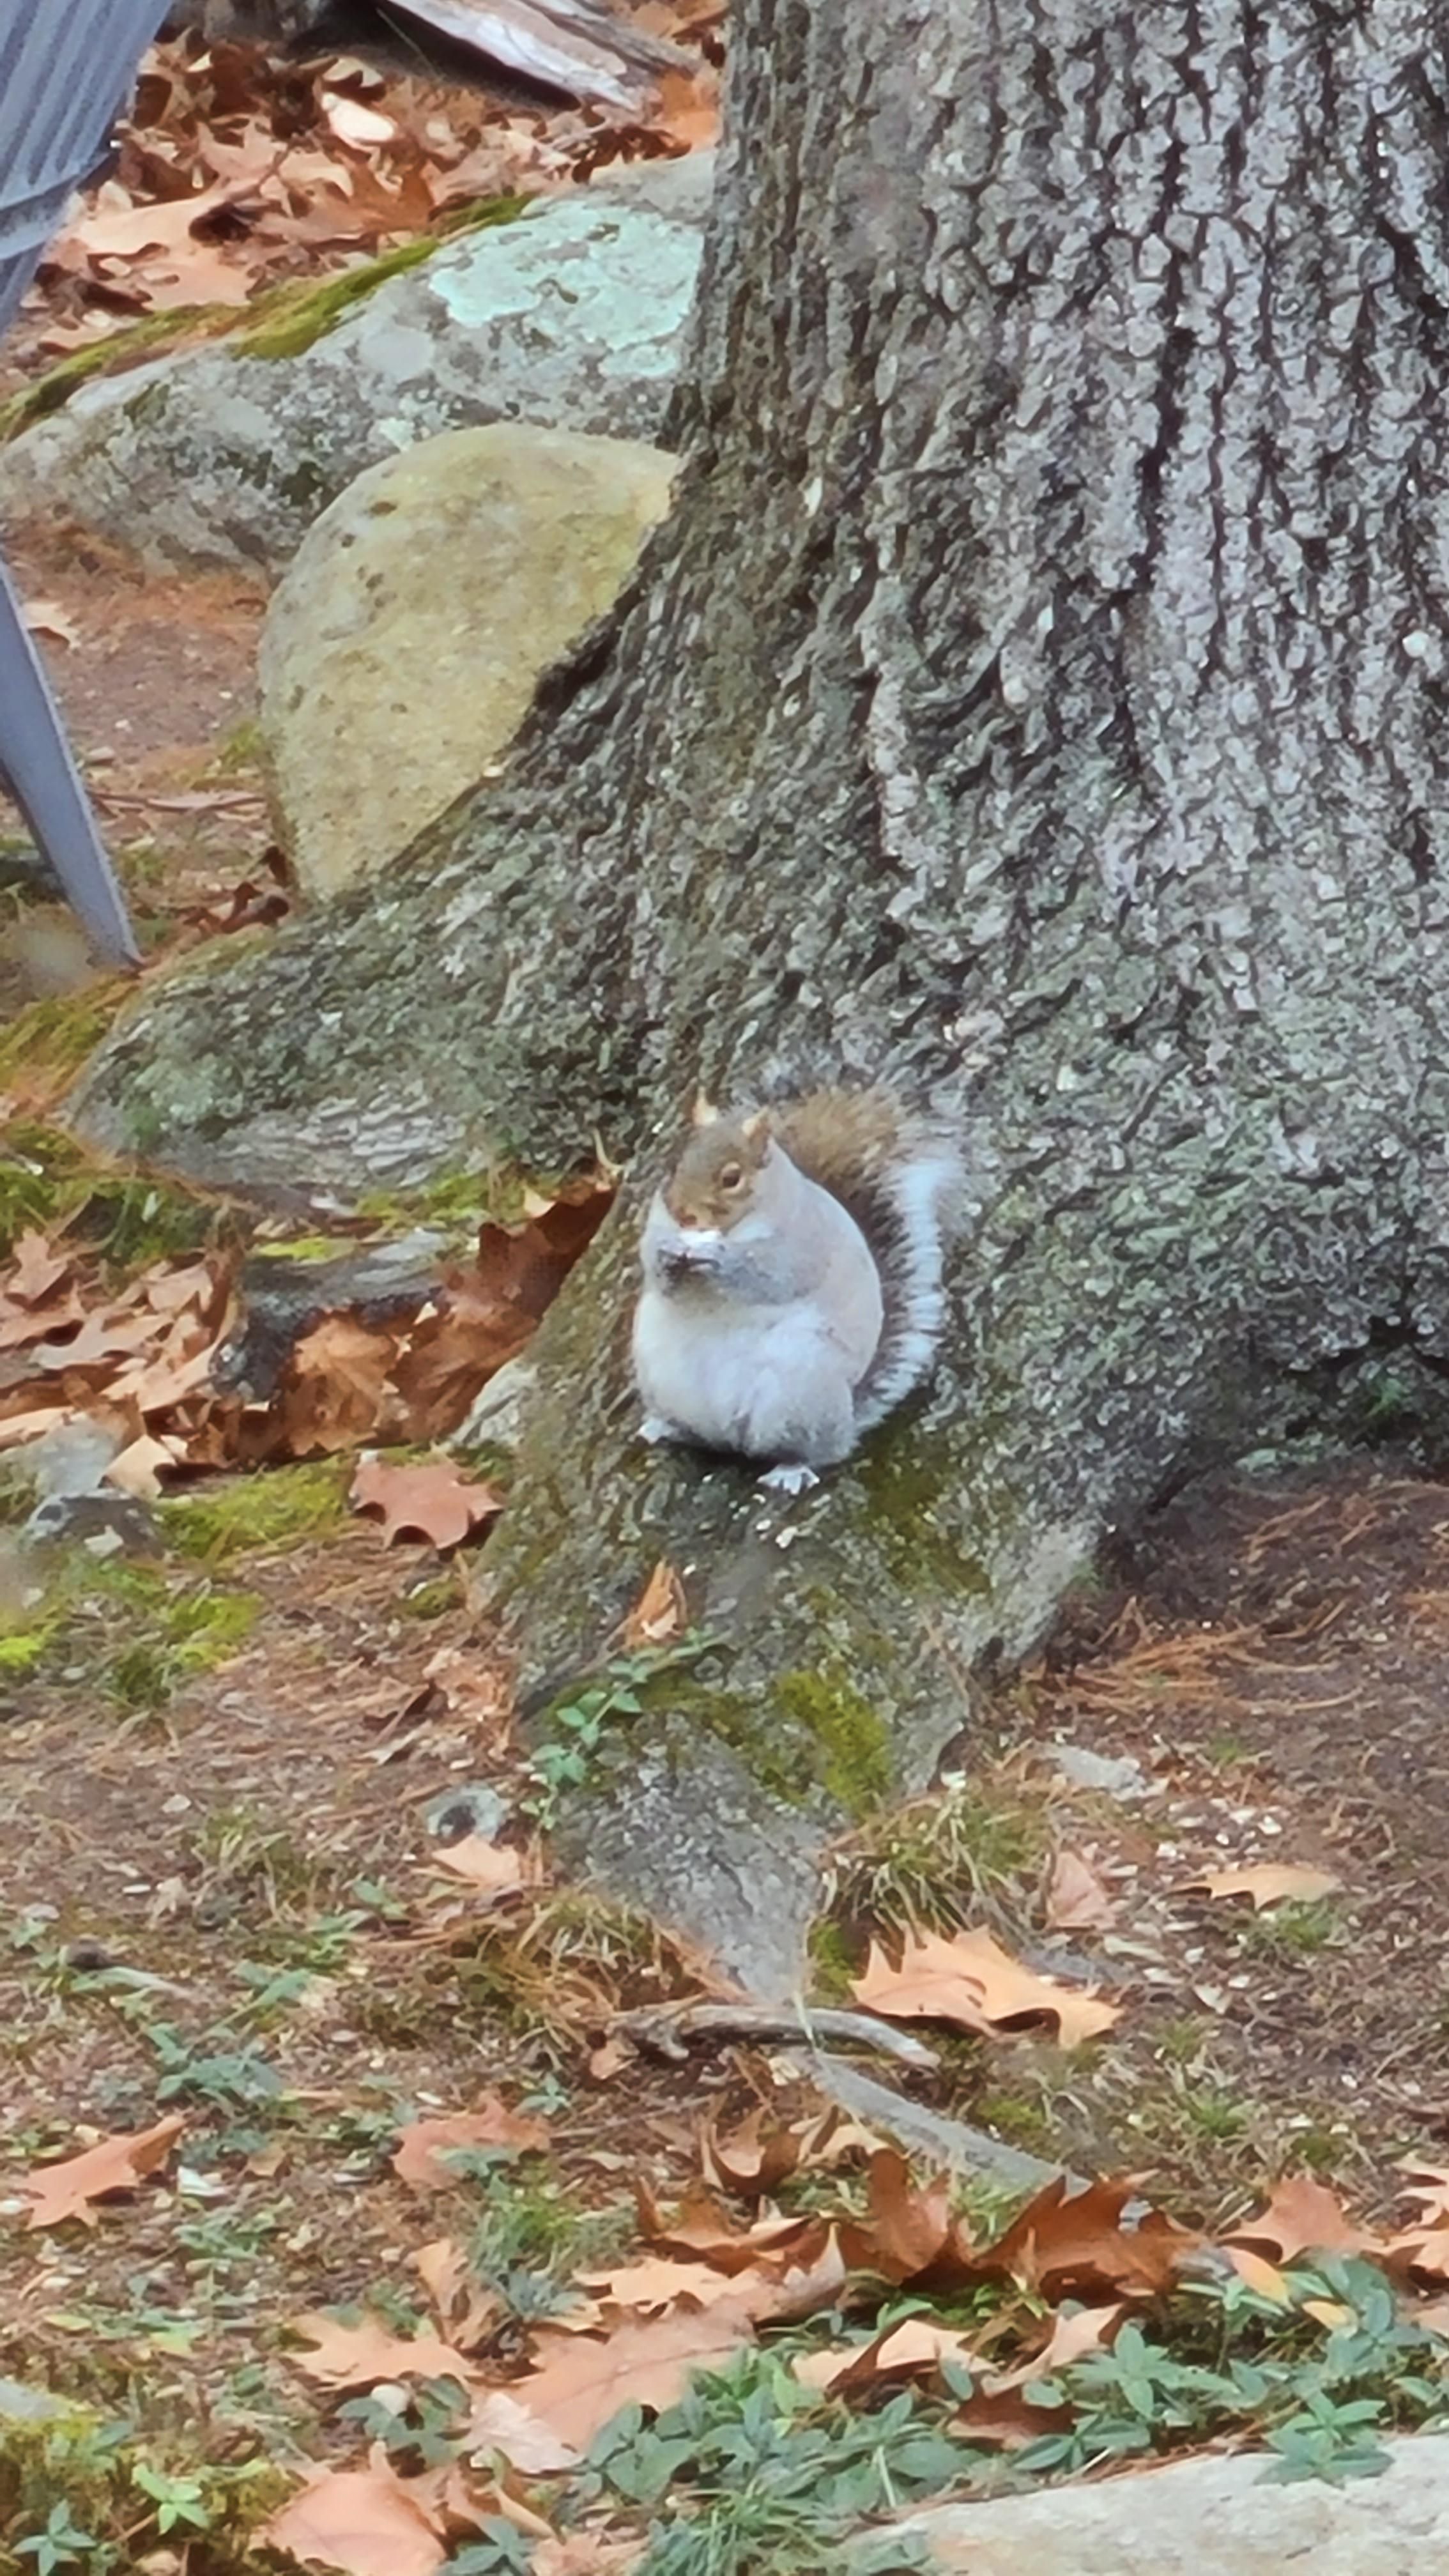 Forget winter, this squirrel in my backyard's getting ready for the Ice Age